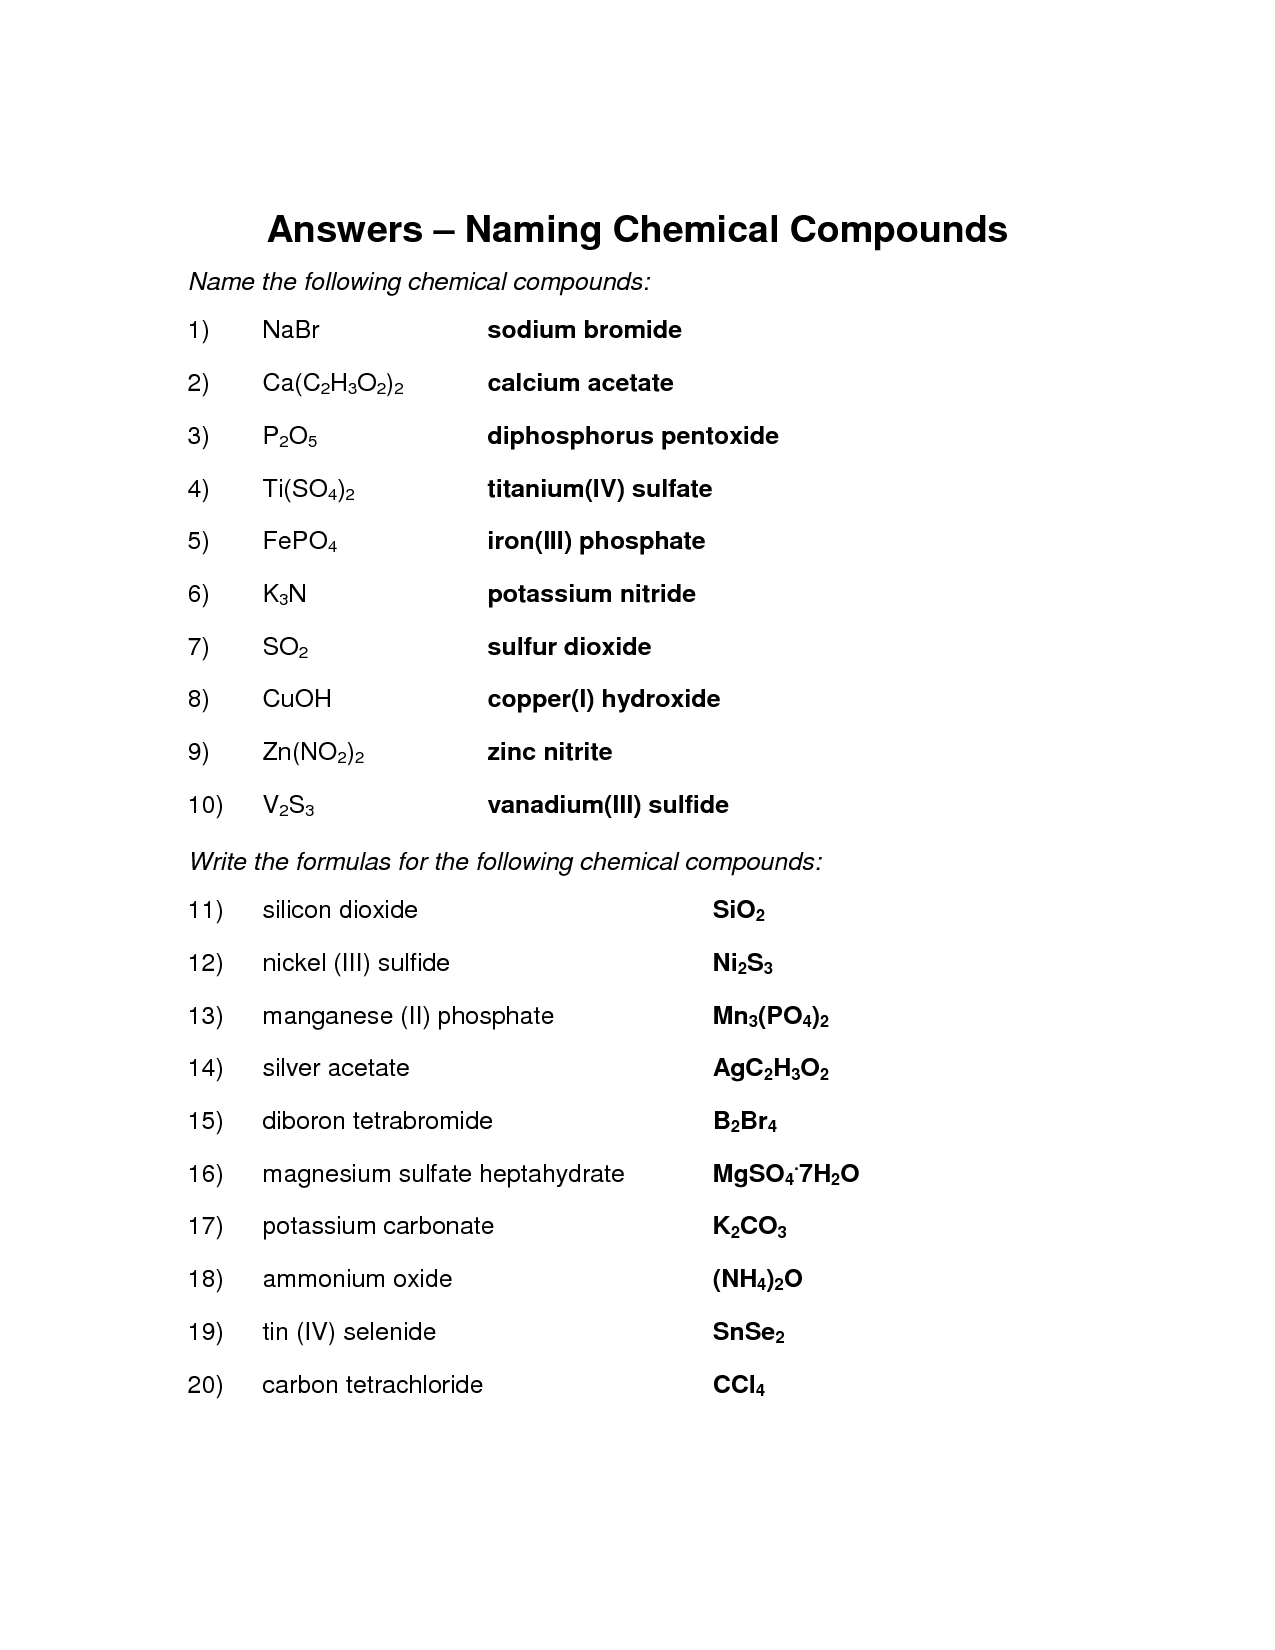 16-best-images-of-nomenclature-worksheet-2-answer-key-naming-ionic-compounds-worksheet-answers